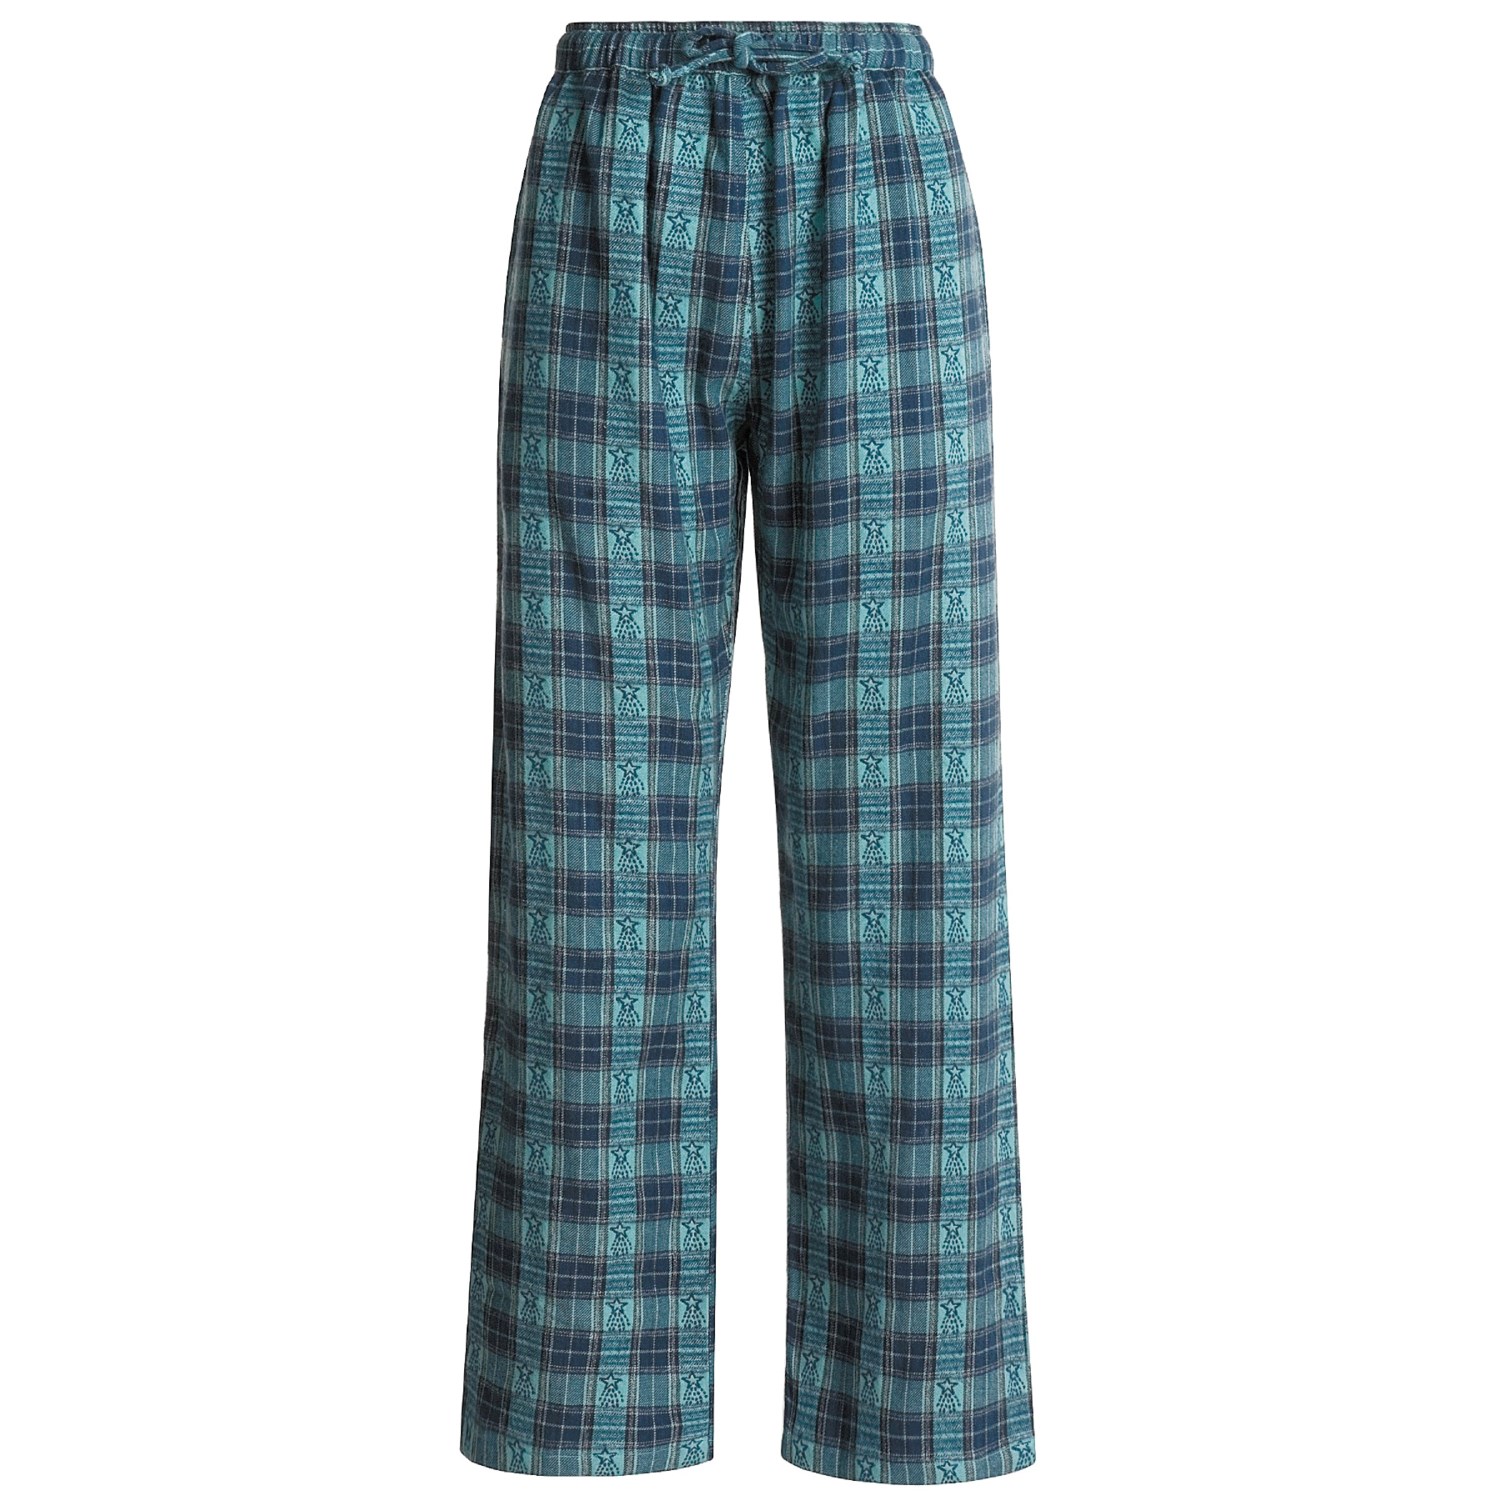 Woolrich Flannel Pajama Pants (For Women) 90819